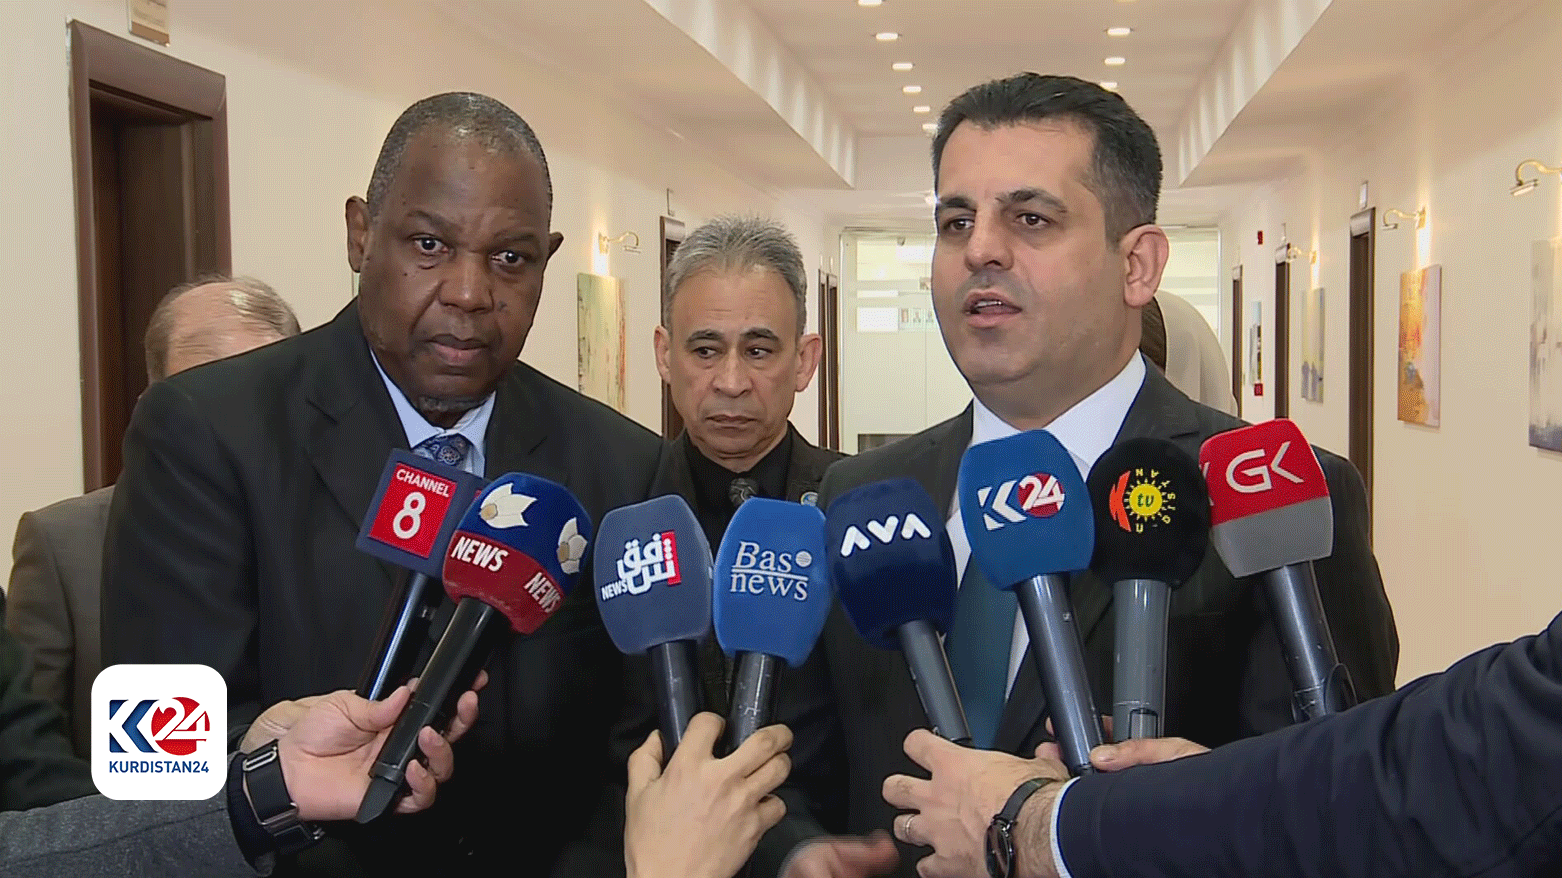 Georges Alfred Ki-Zerbo (left), the new WHO Representative and Head of Mission in Iraq, speaking at the press conference, Feb. 11, 2024. (Photo: Kurdistan24)